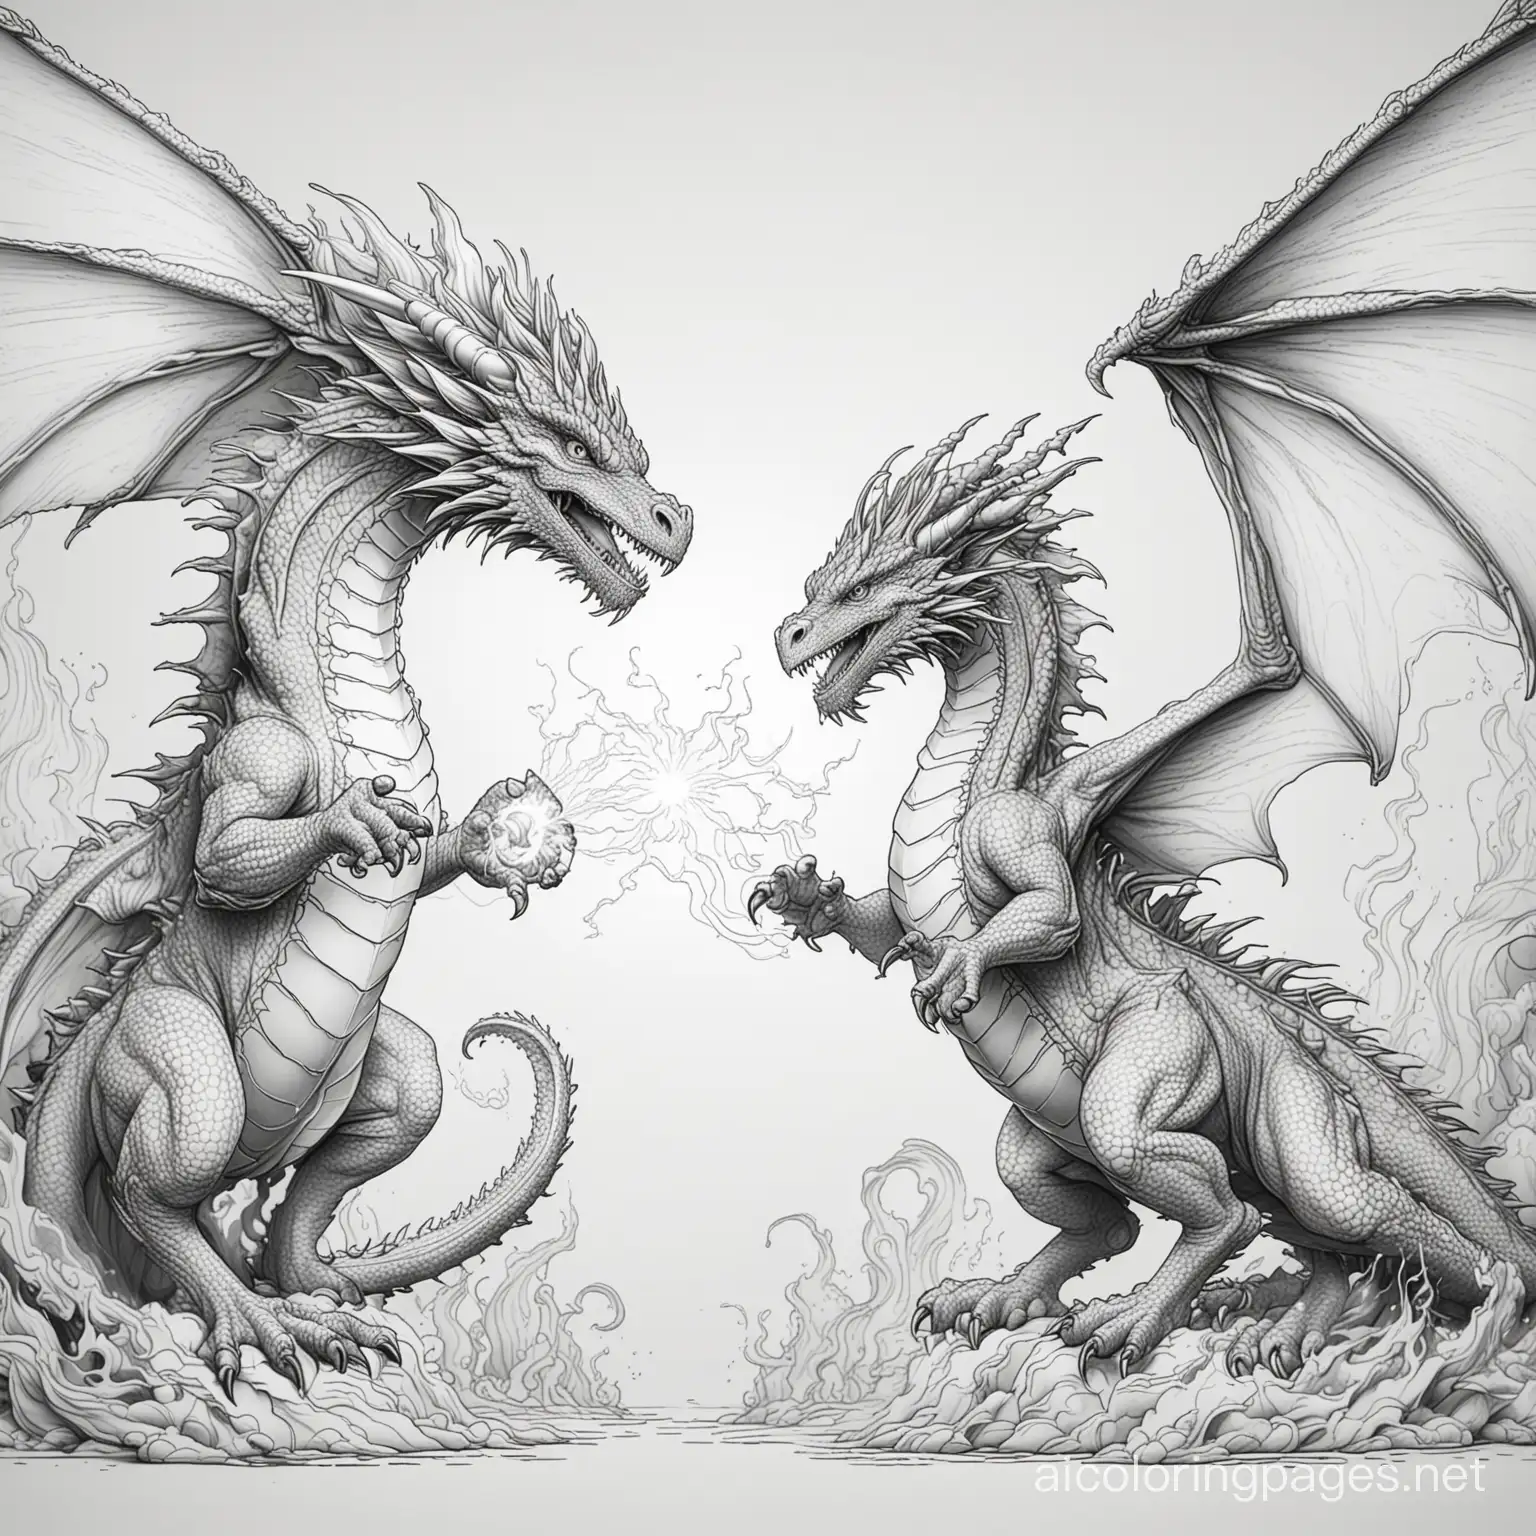 magical electric dragon versus fire dragon , Coloring Page, black and white, line art, white background, Simplicity, Ample White Space. The background of the coloring page is plain white to make it easy for young children to color within the lines. The outlines of all the subjects are easy to distinguish, making it simple for kids to color without too much difficulty